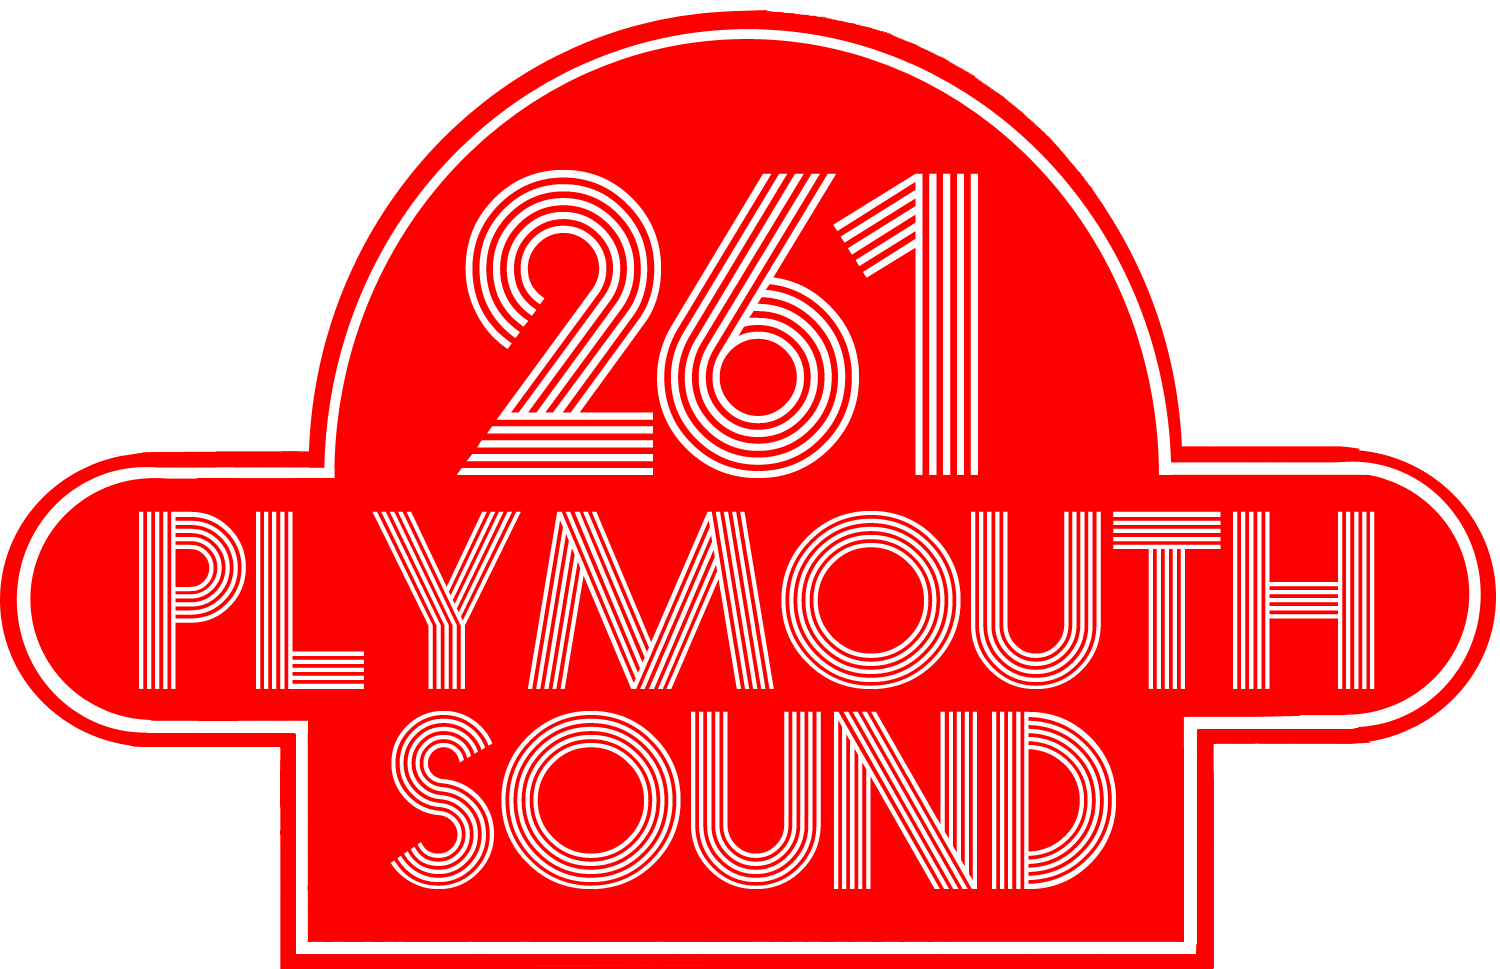 Plymouth Heart Logo - Heart South West